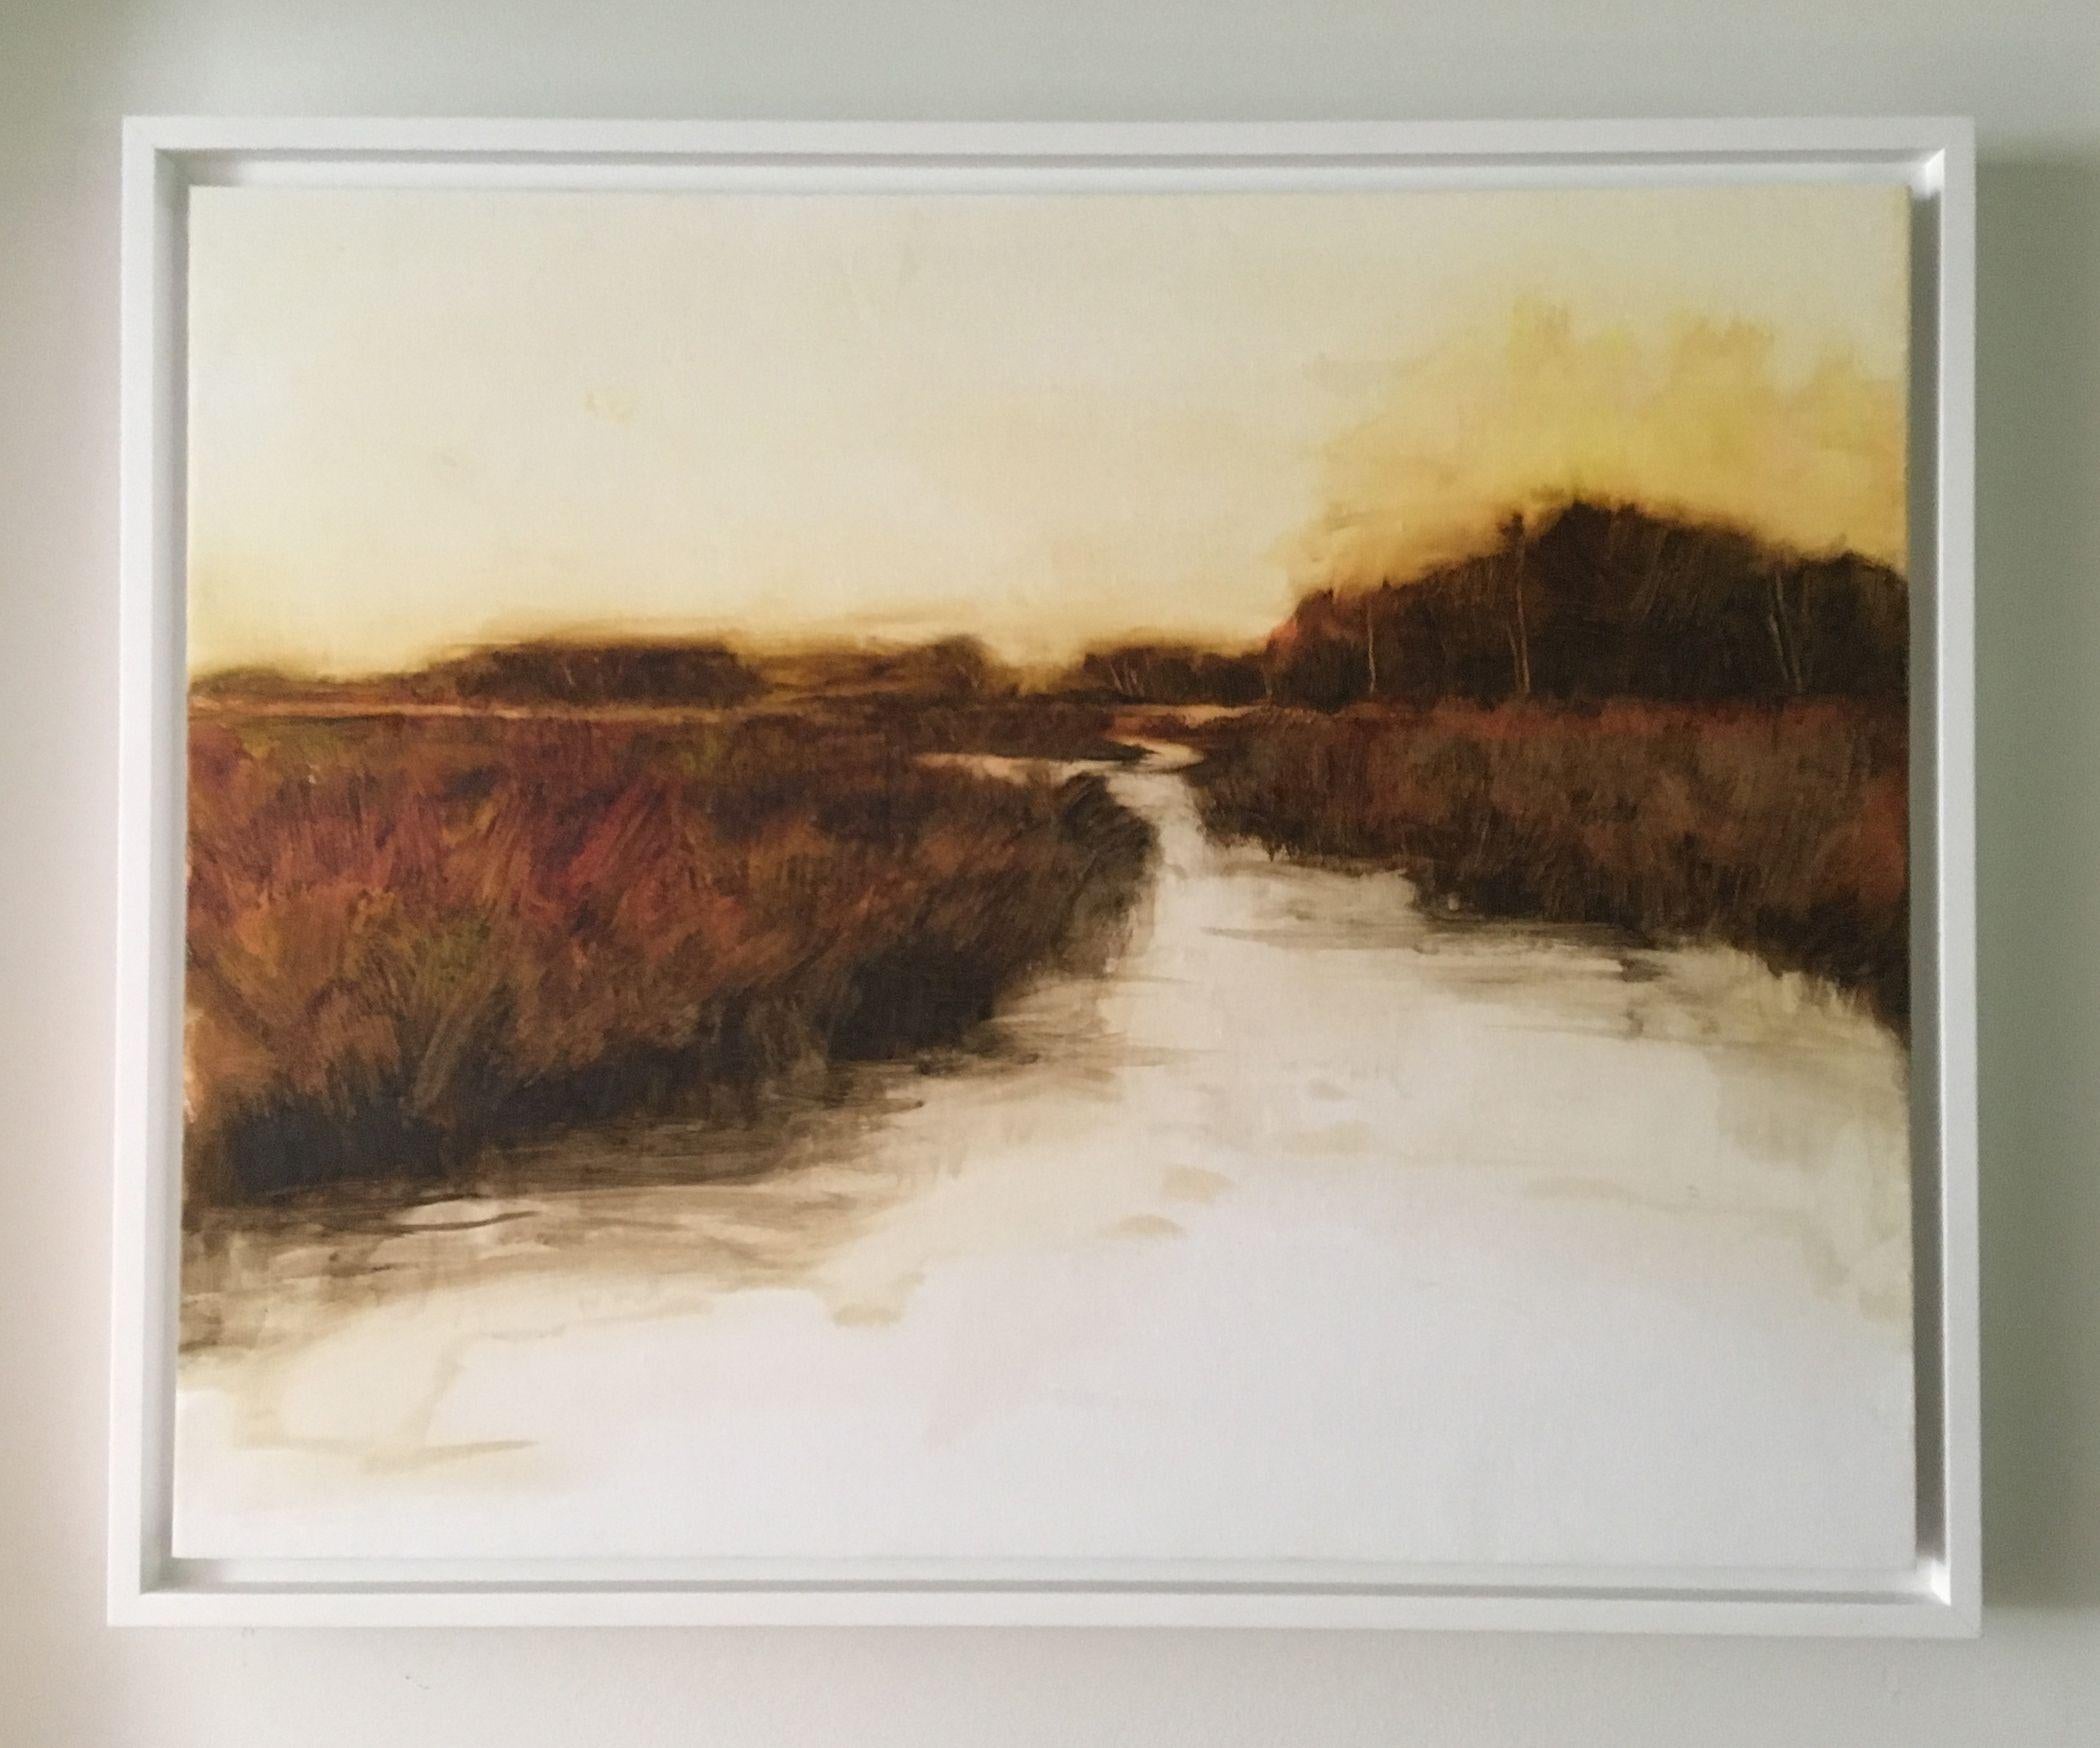 This landscape is in my minimalist style which uses a maximum of 4 colors to create a serene, calming painting. I paint on canvas, then using an acid free adhesive, mount it to a wooden cradle board. I then frame it in a white canvas floater frame